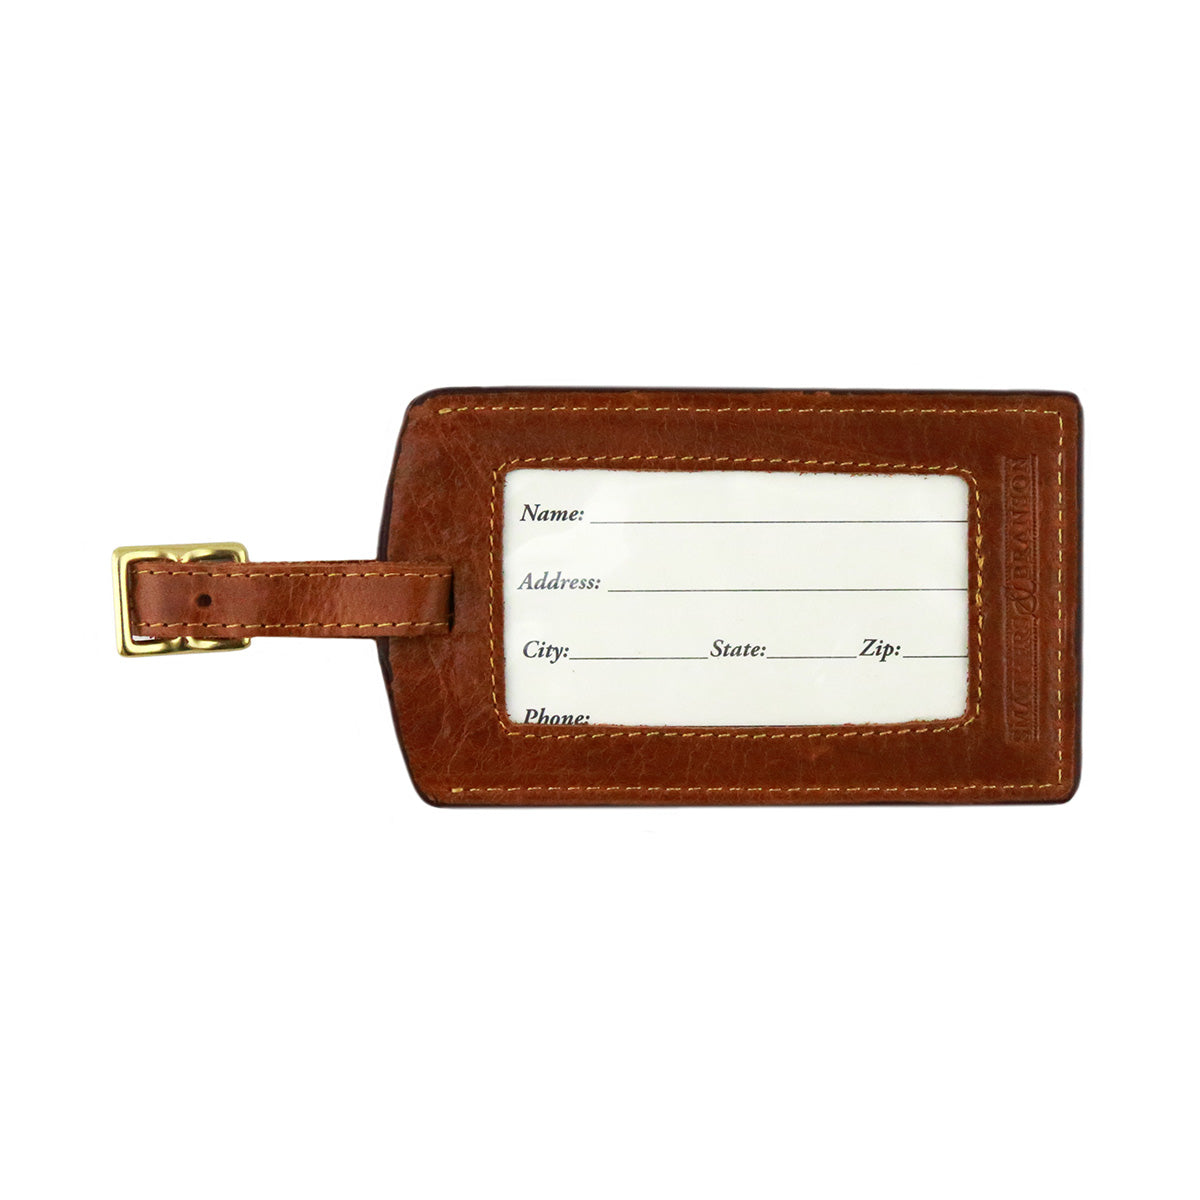 Smathers & Branson x Barstool Golf Crossed Tees Luggage Tag-Golf Accessories-Fore Play-Navy-One Size-Barstool Sports